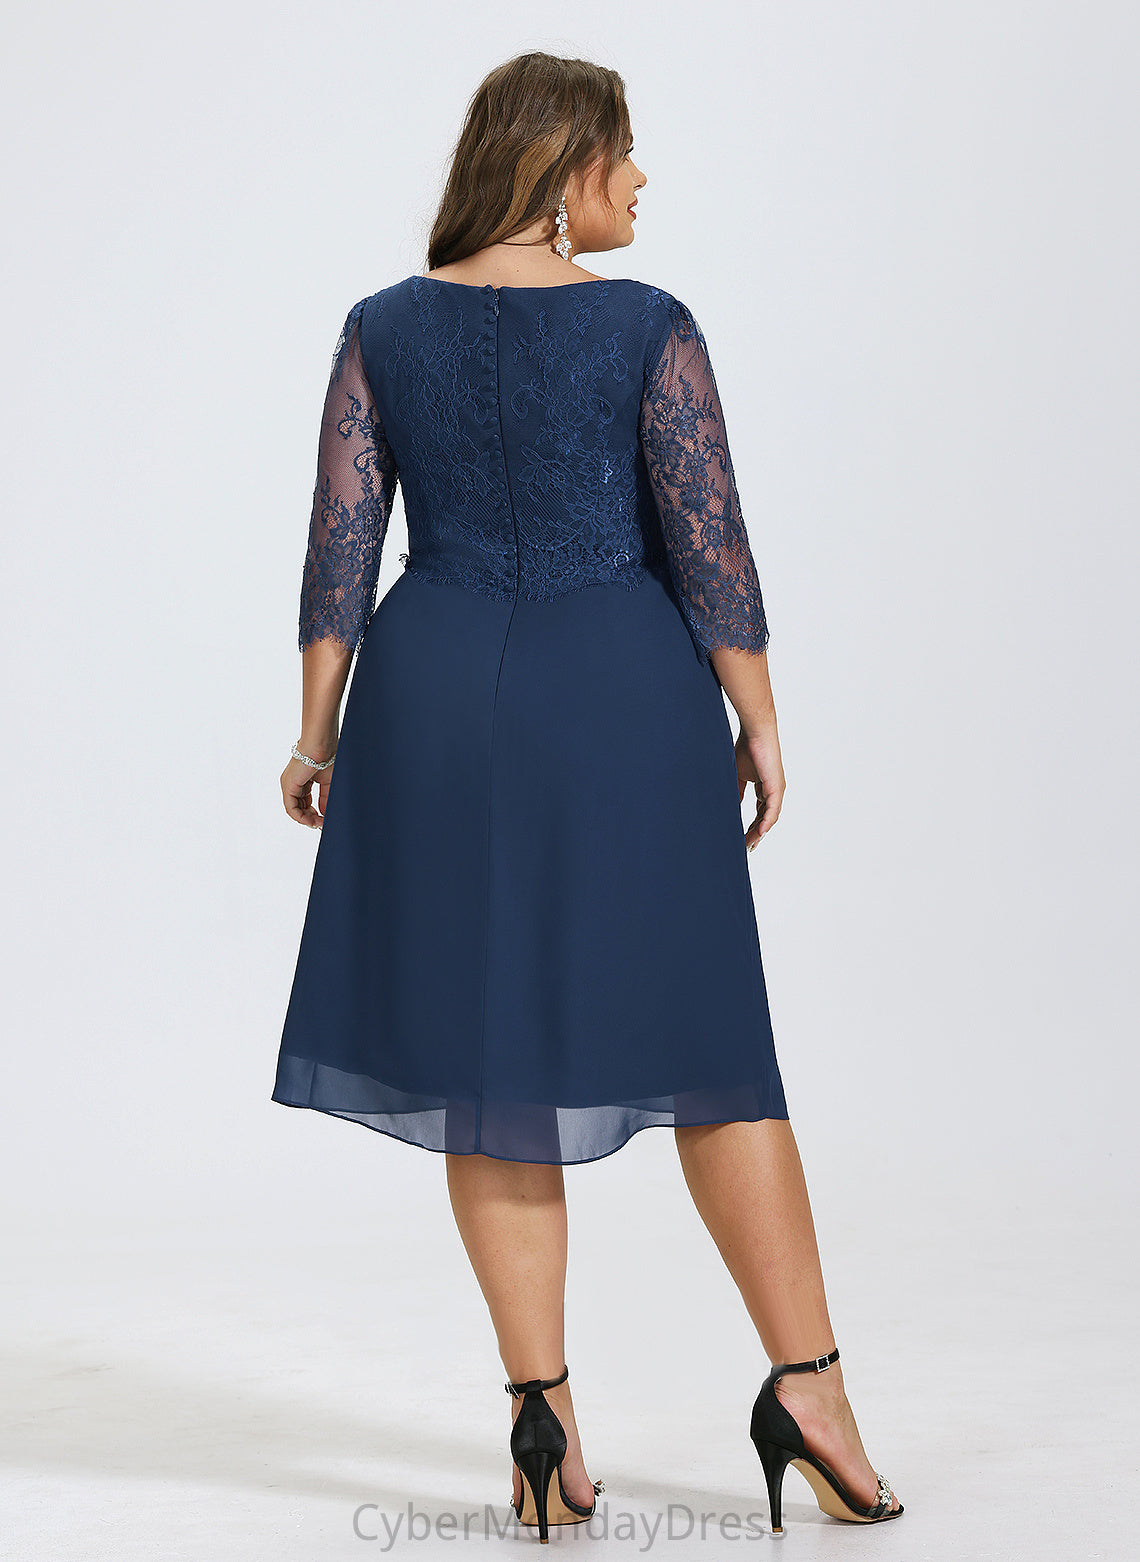 Sheath/Column Maureen Lace Scoop With Neck Chiffon Knee-Length Dress Ruffle Cocktail Dresses Cocktail